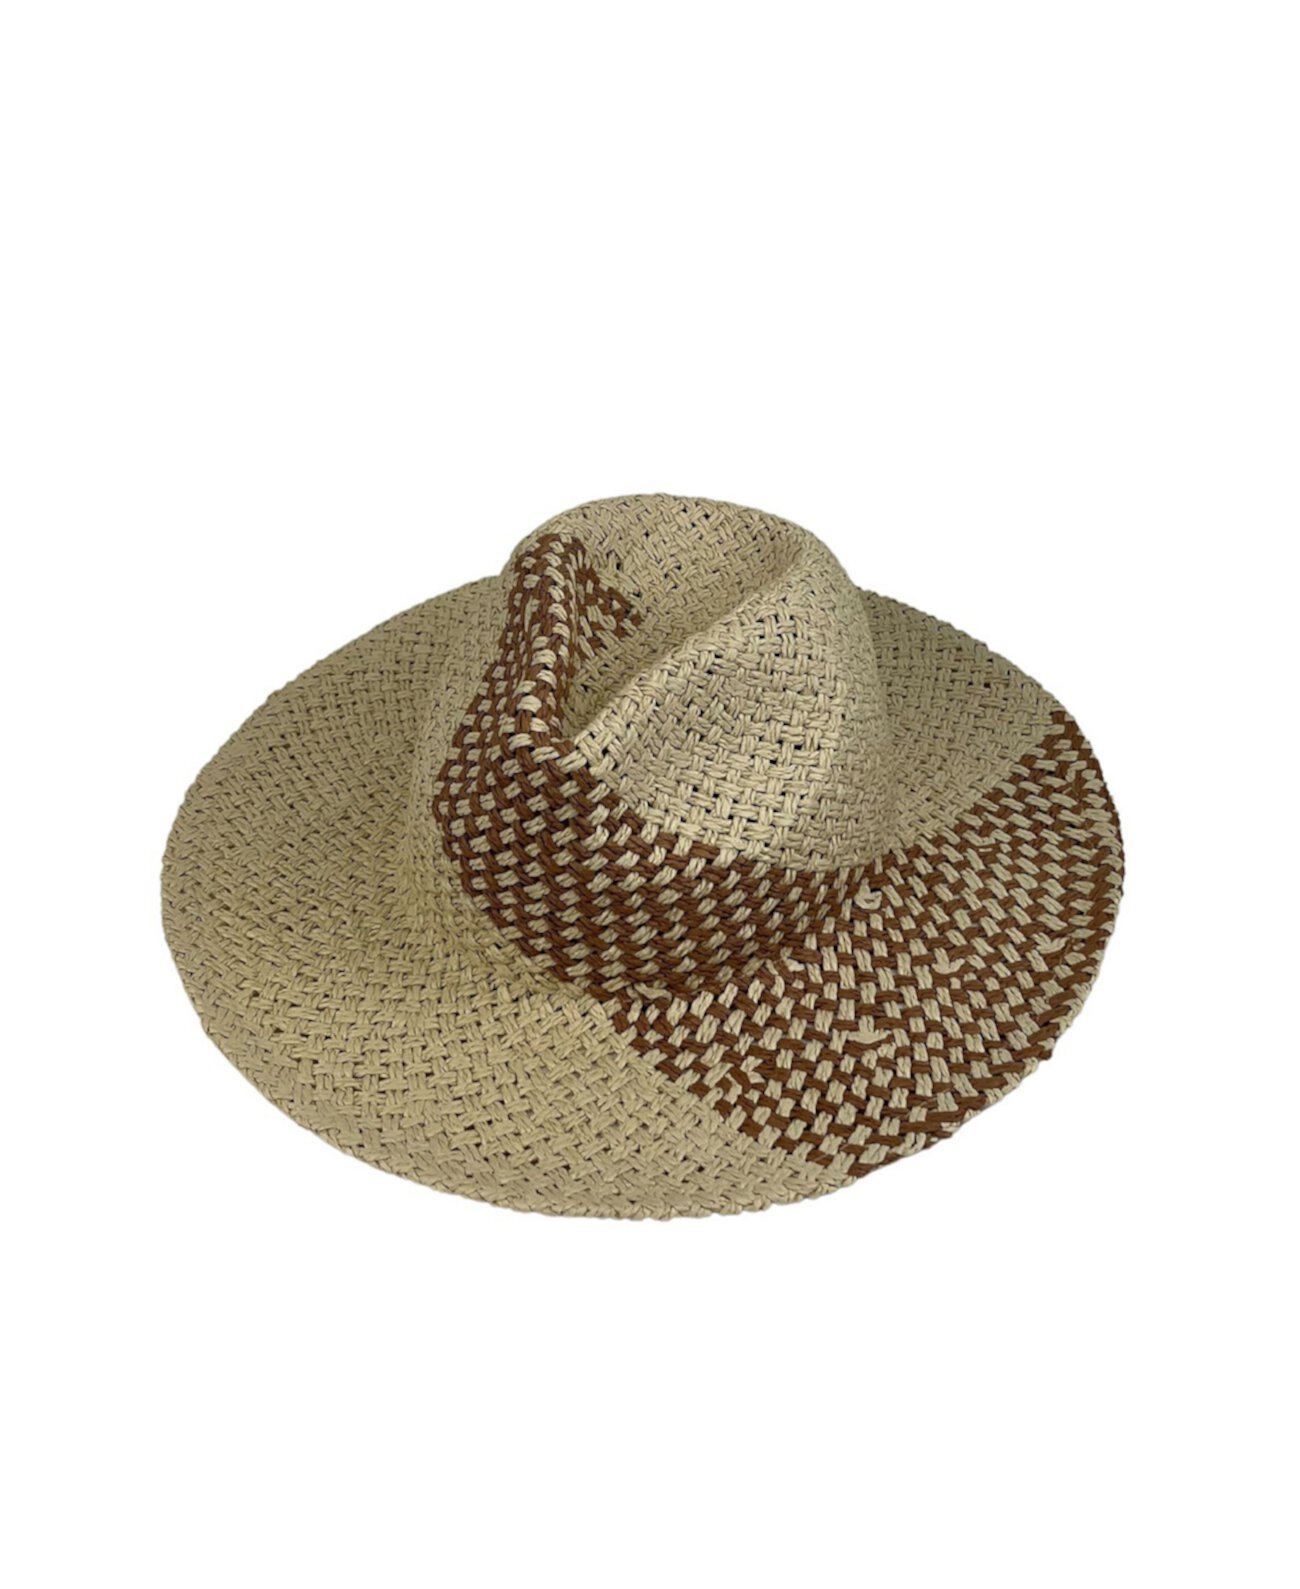 Women's Straw Panama Hat with Color Detail Marcus Adler